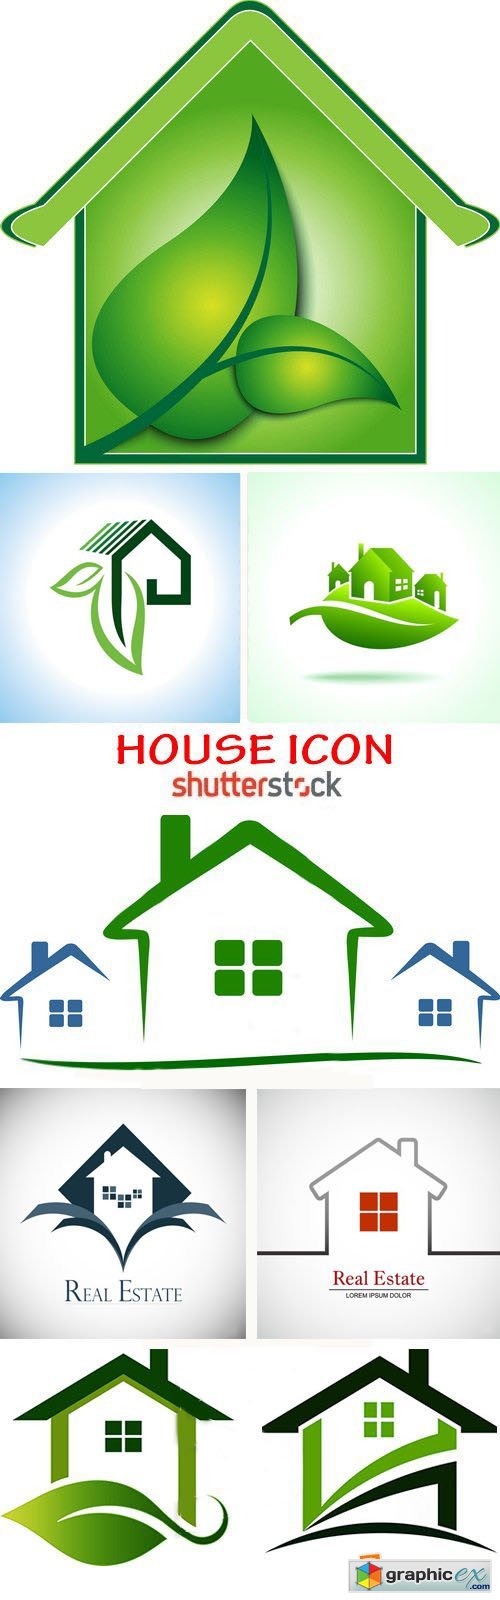 Amazing SS - House icon, 25xEPS